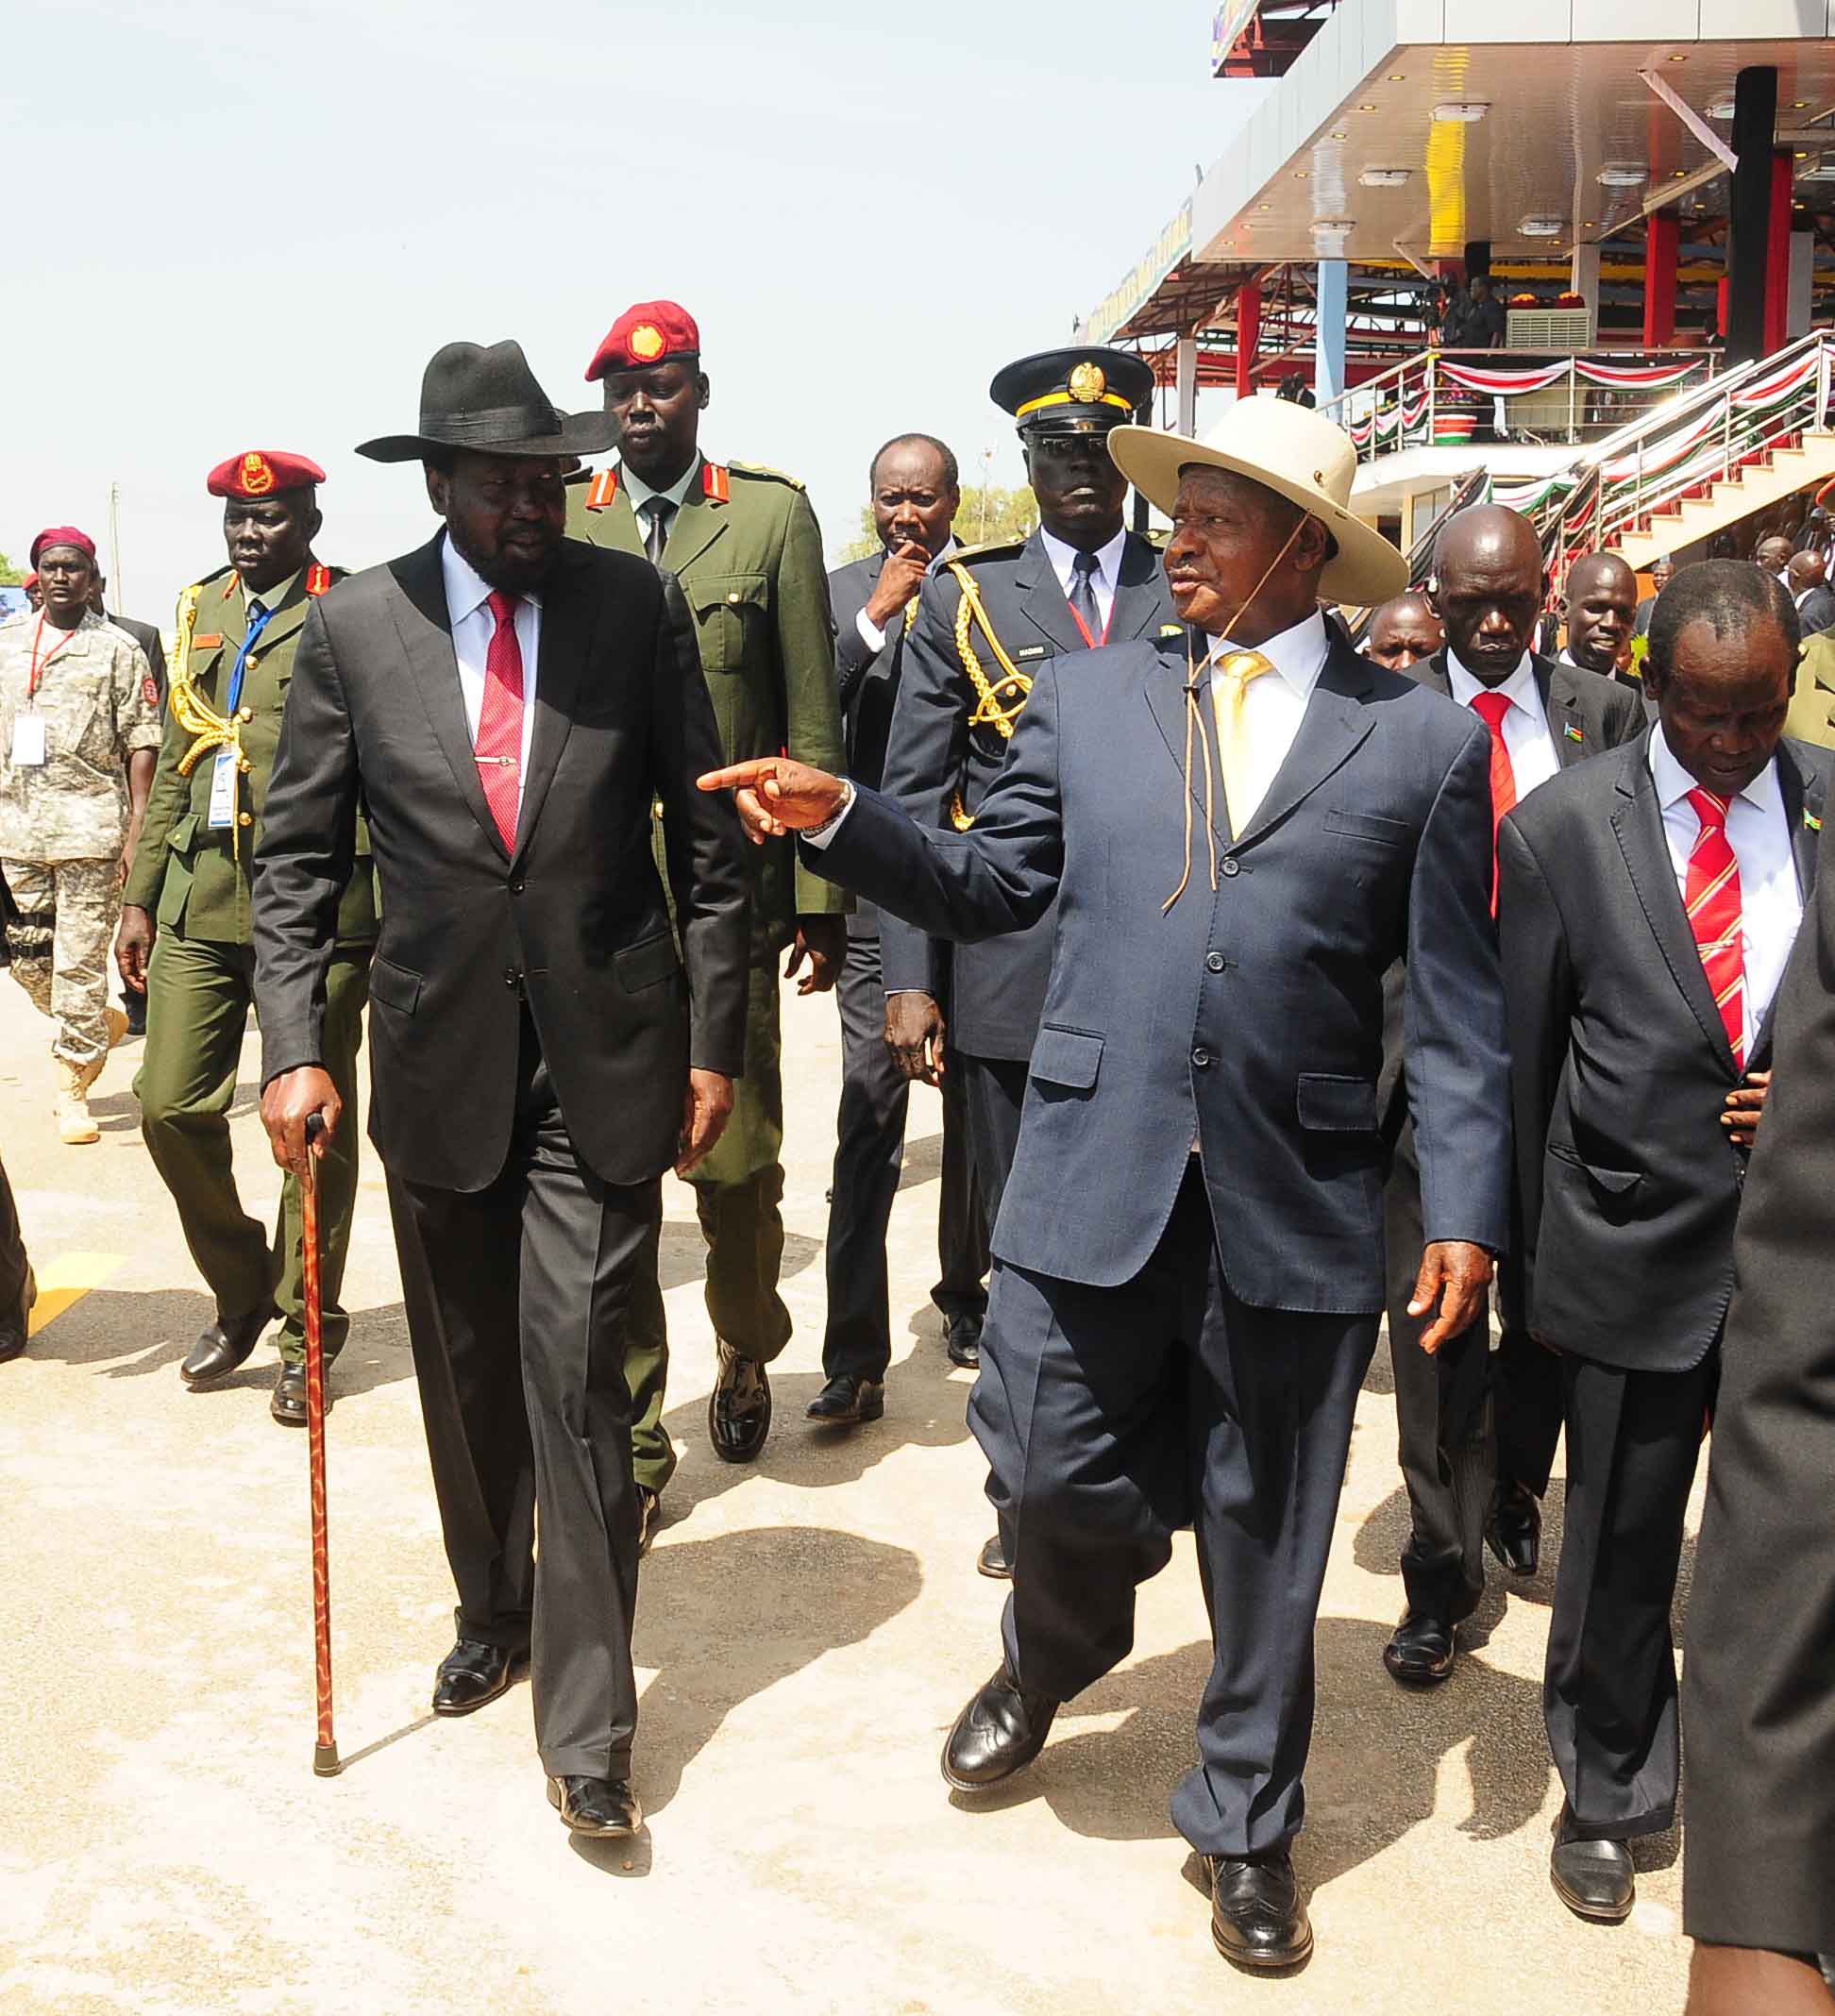 President Museveni used the occasion to call for peace and unity among the African people 